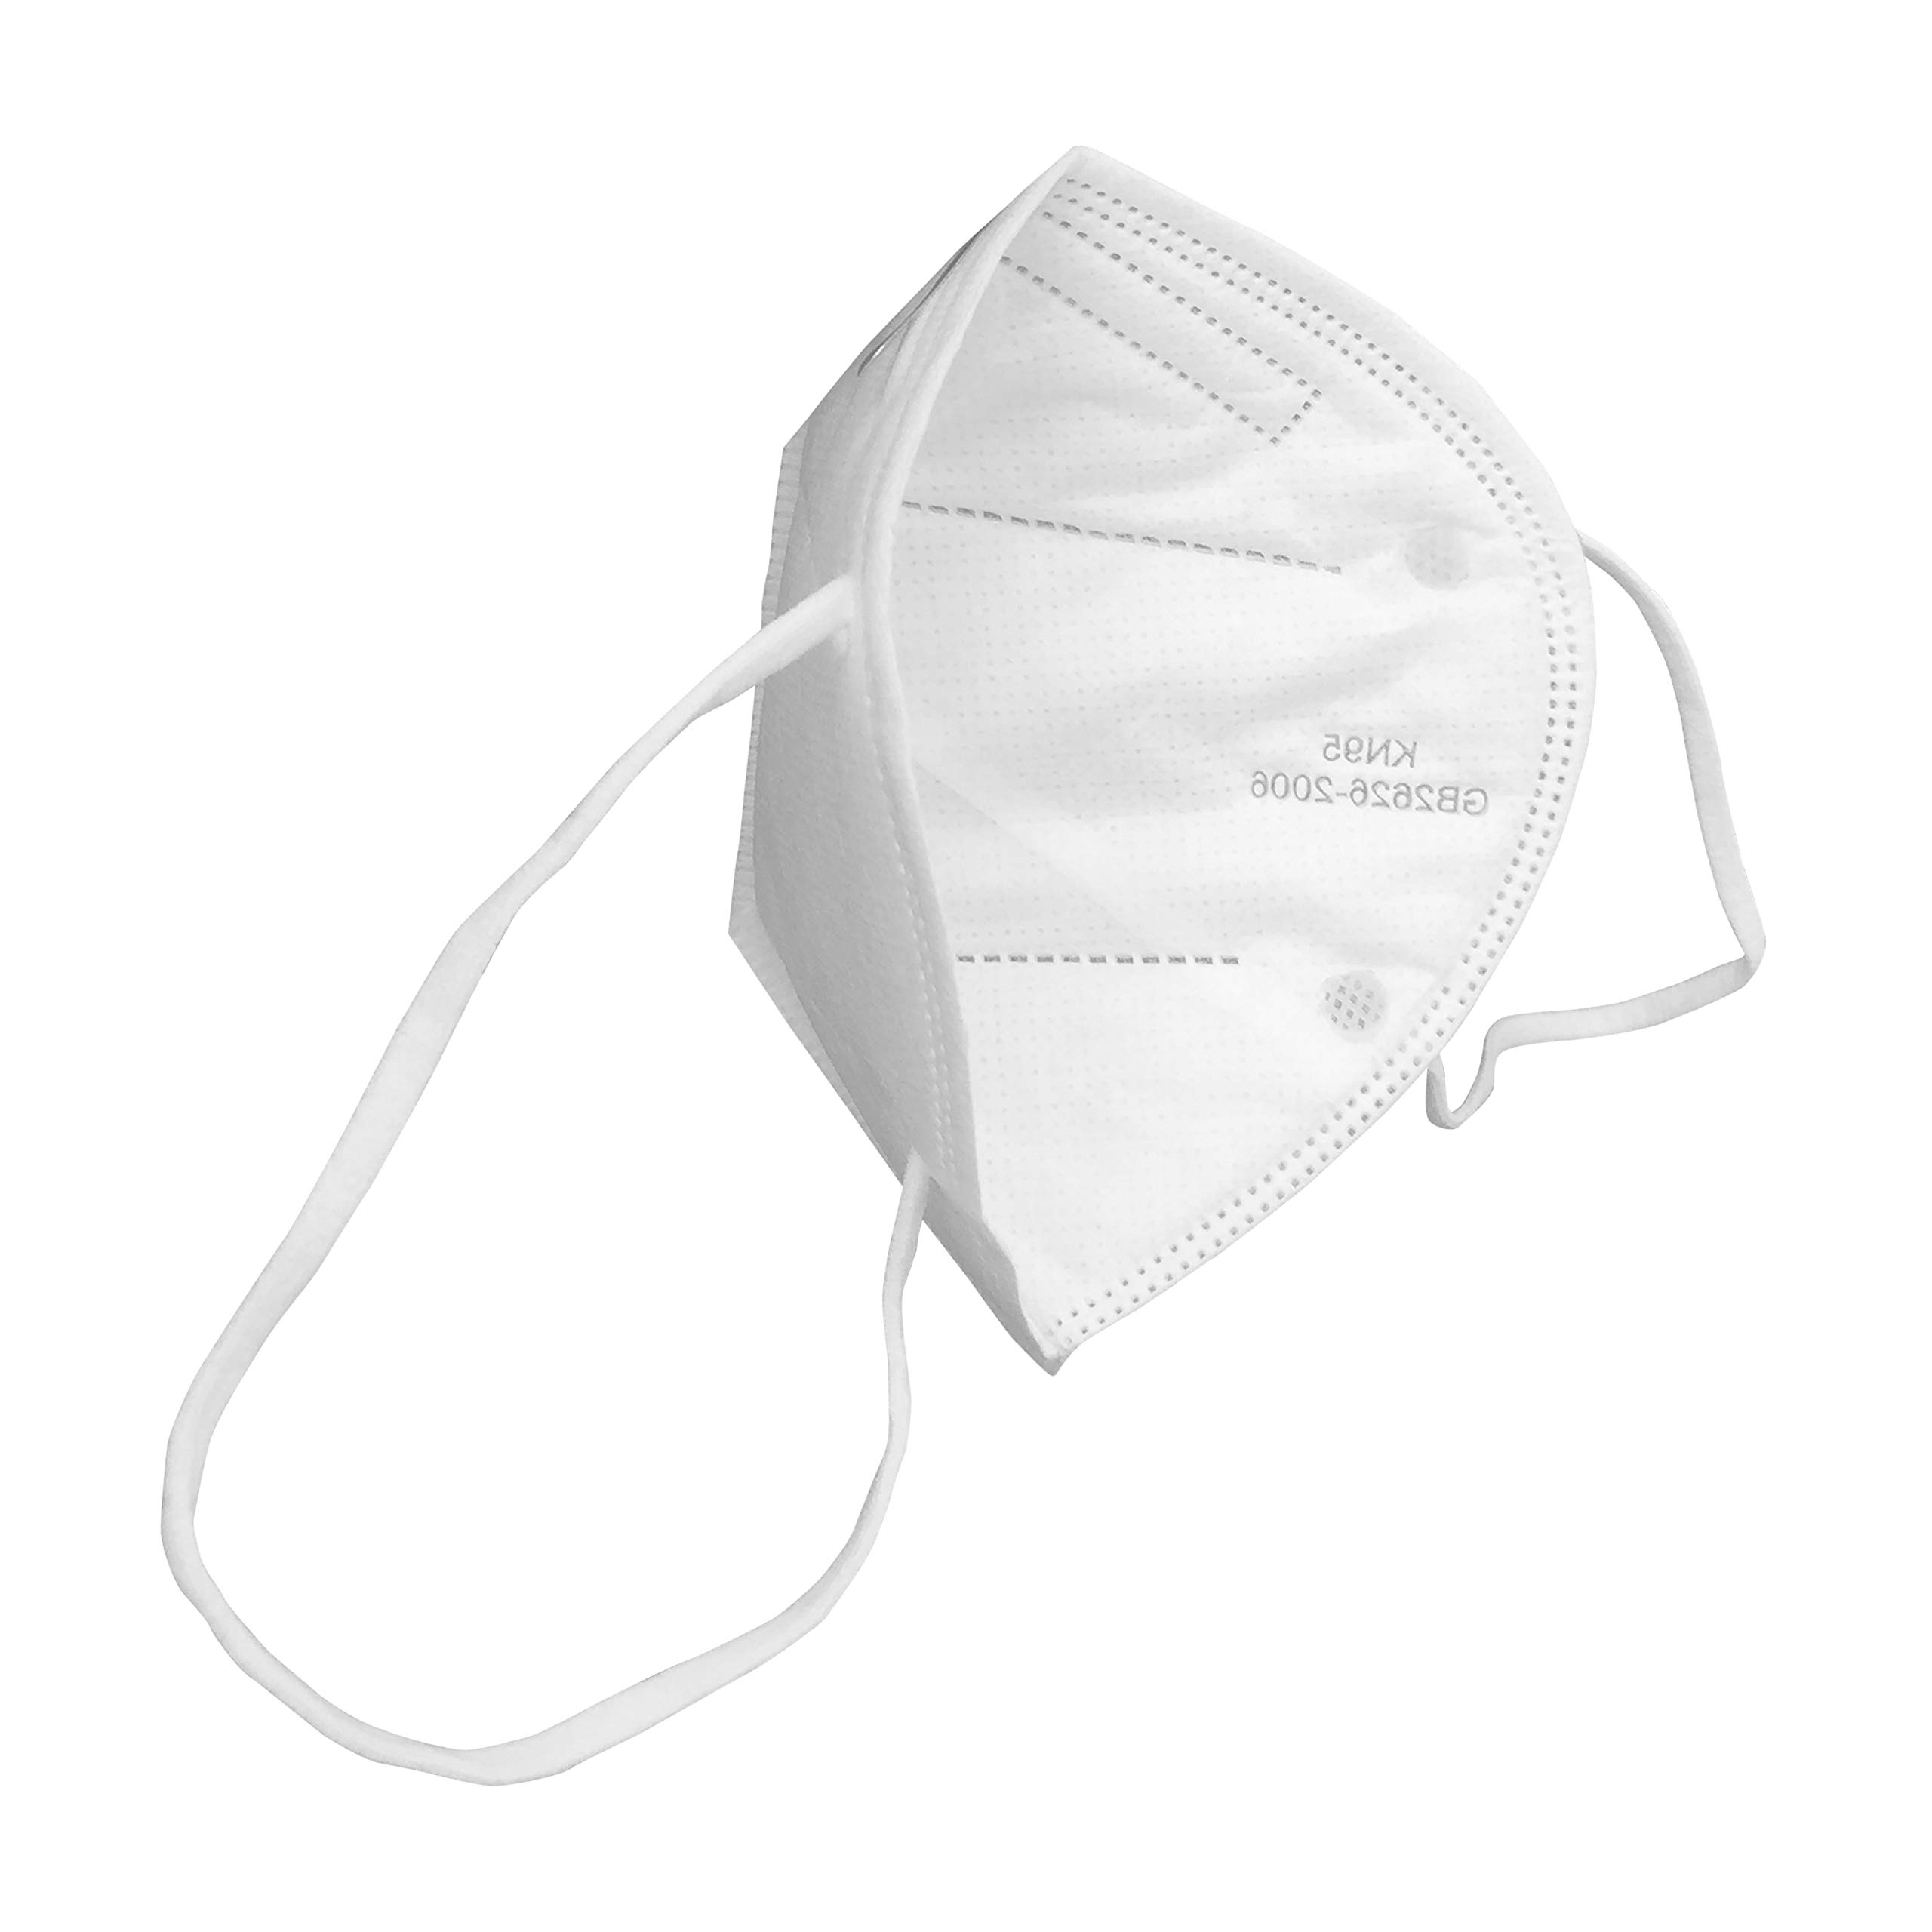 SupplyAID RRS-KN95-5PK KN95 Face Mask for Protection Against PM2.5 Dust, Pollen and Haze-Proof, 5 Pack, White